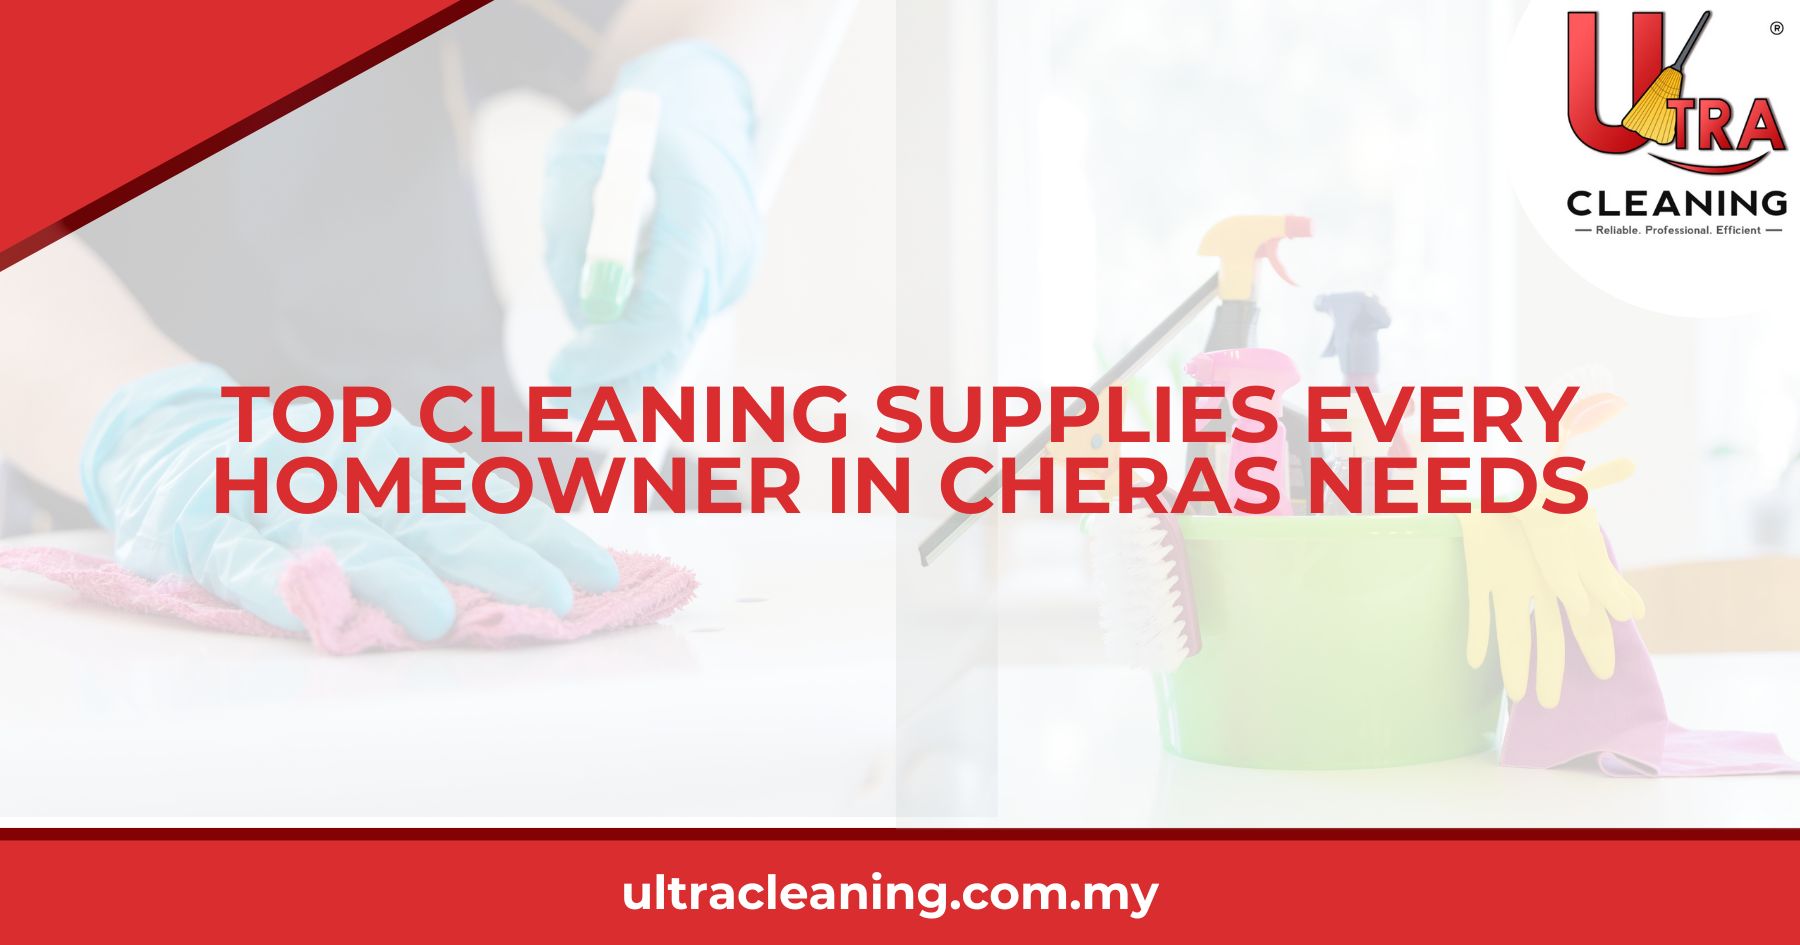 Top Cleaning Supplies Every Homeowner in Cheras Needs